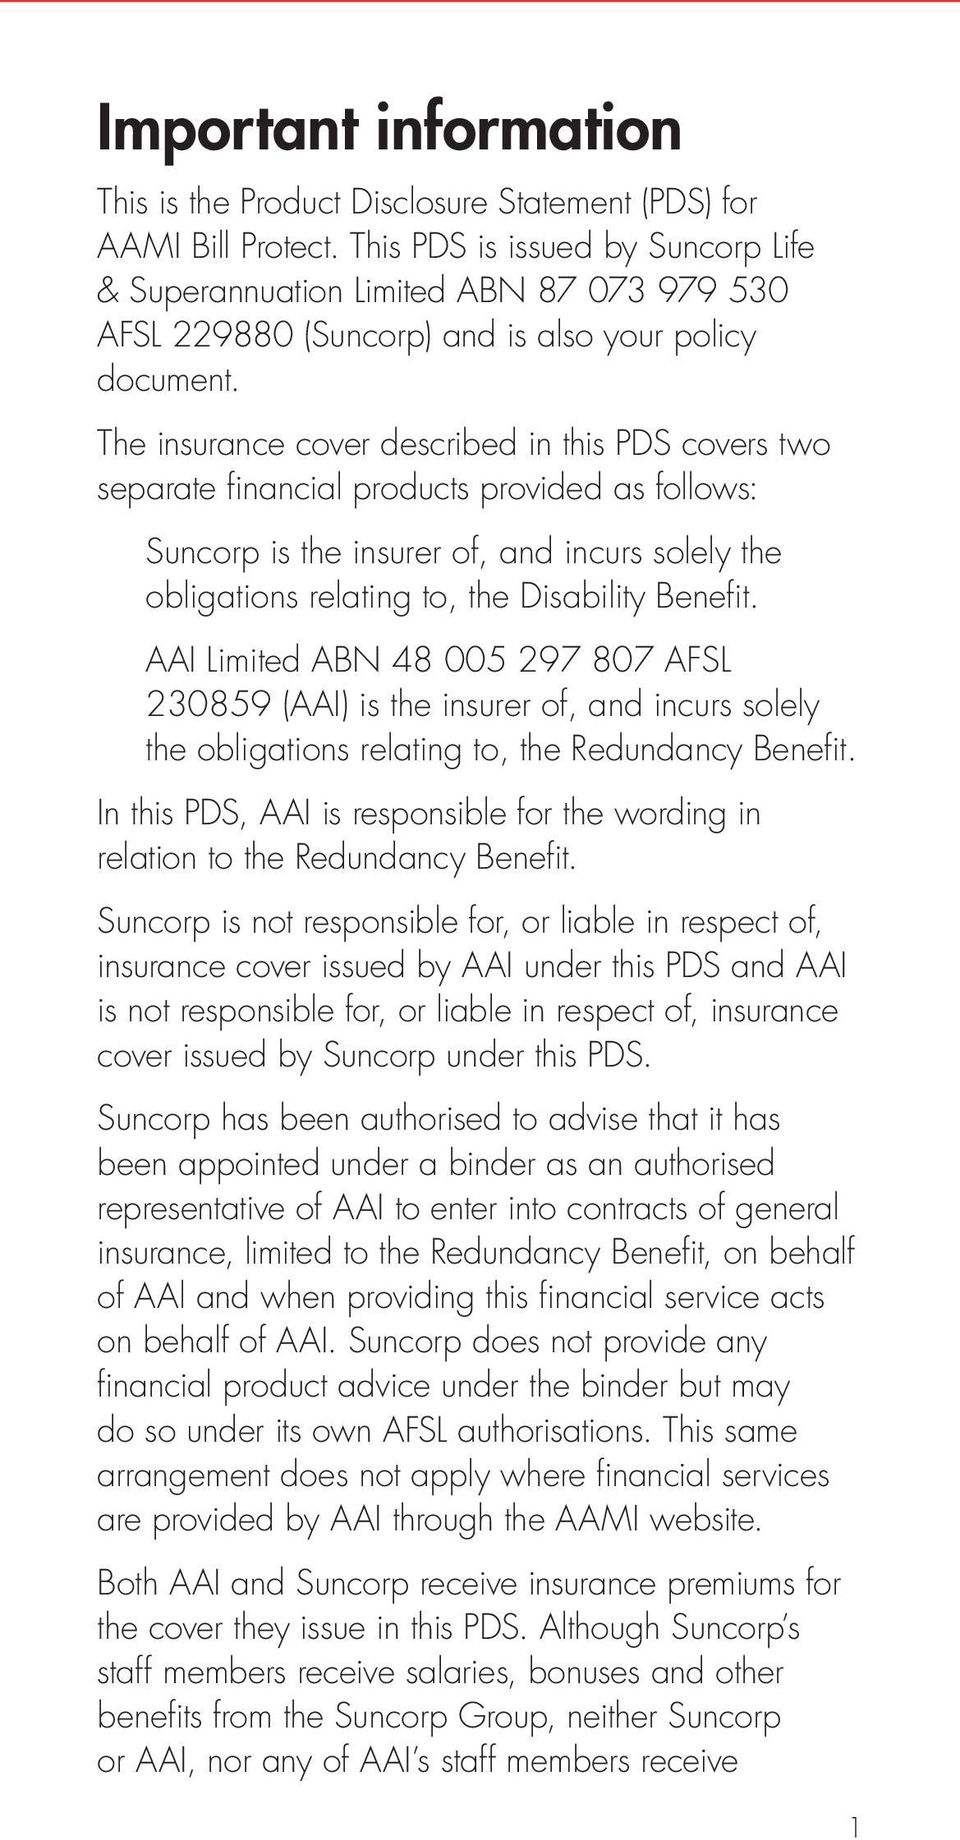 The insurance cover described in this PDS covers two separate financial products provided as follows: Suncorp is the insurer of, and incurs solely the obligations relating to, the Disability Benefit.